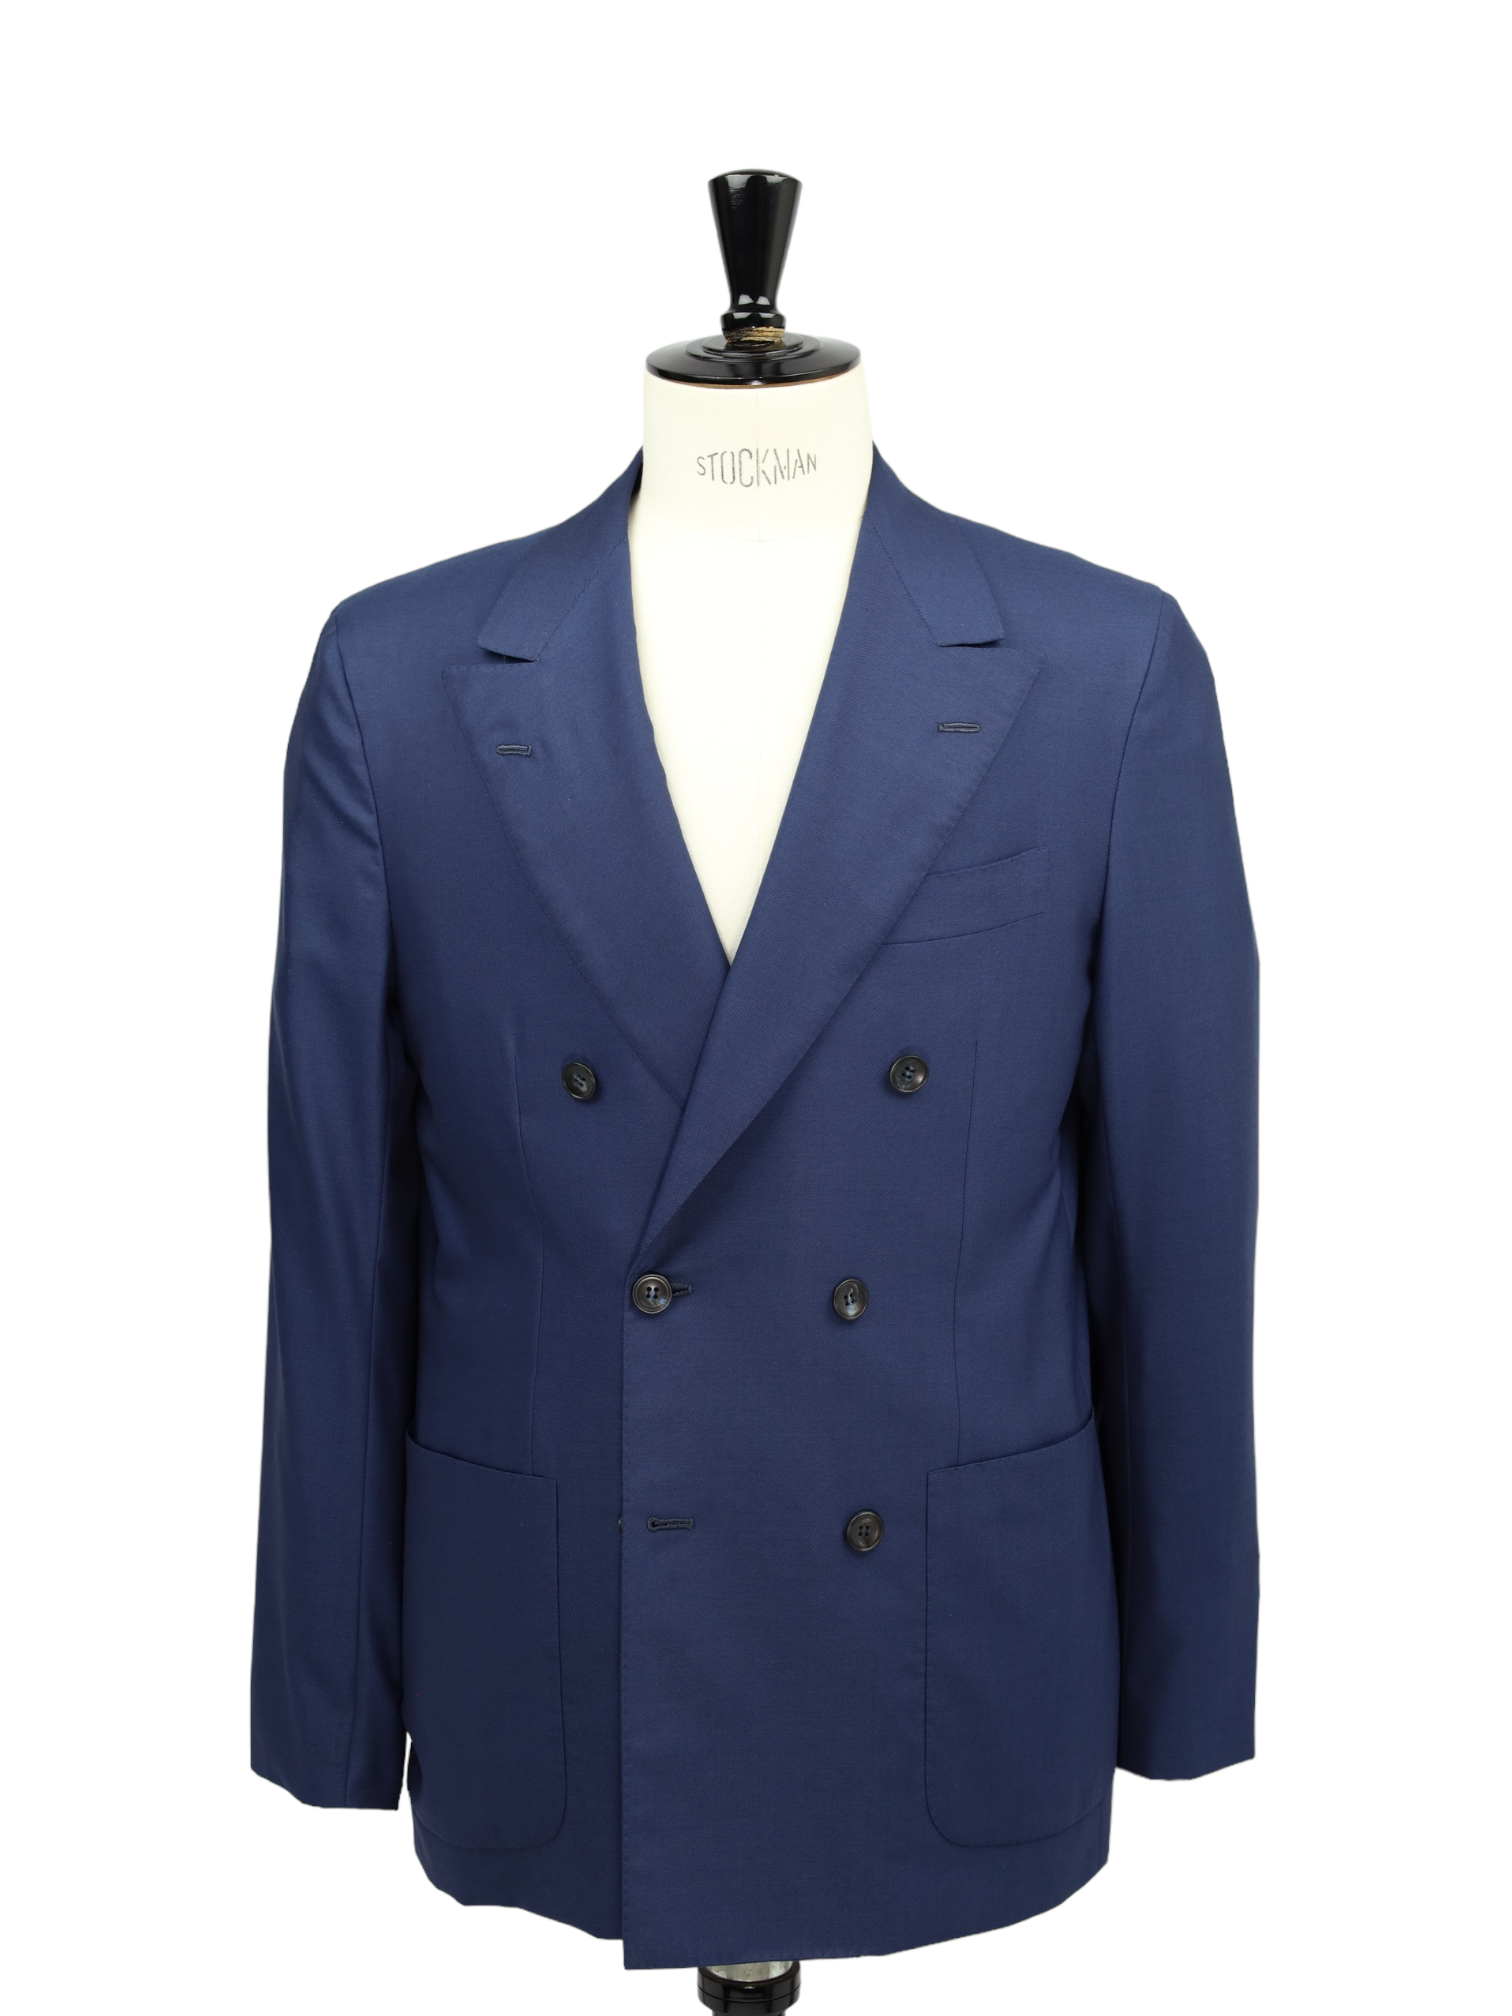 Kiton Blue Double Breasted Neapolitan Suit